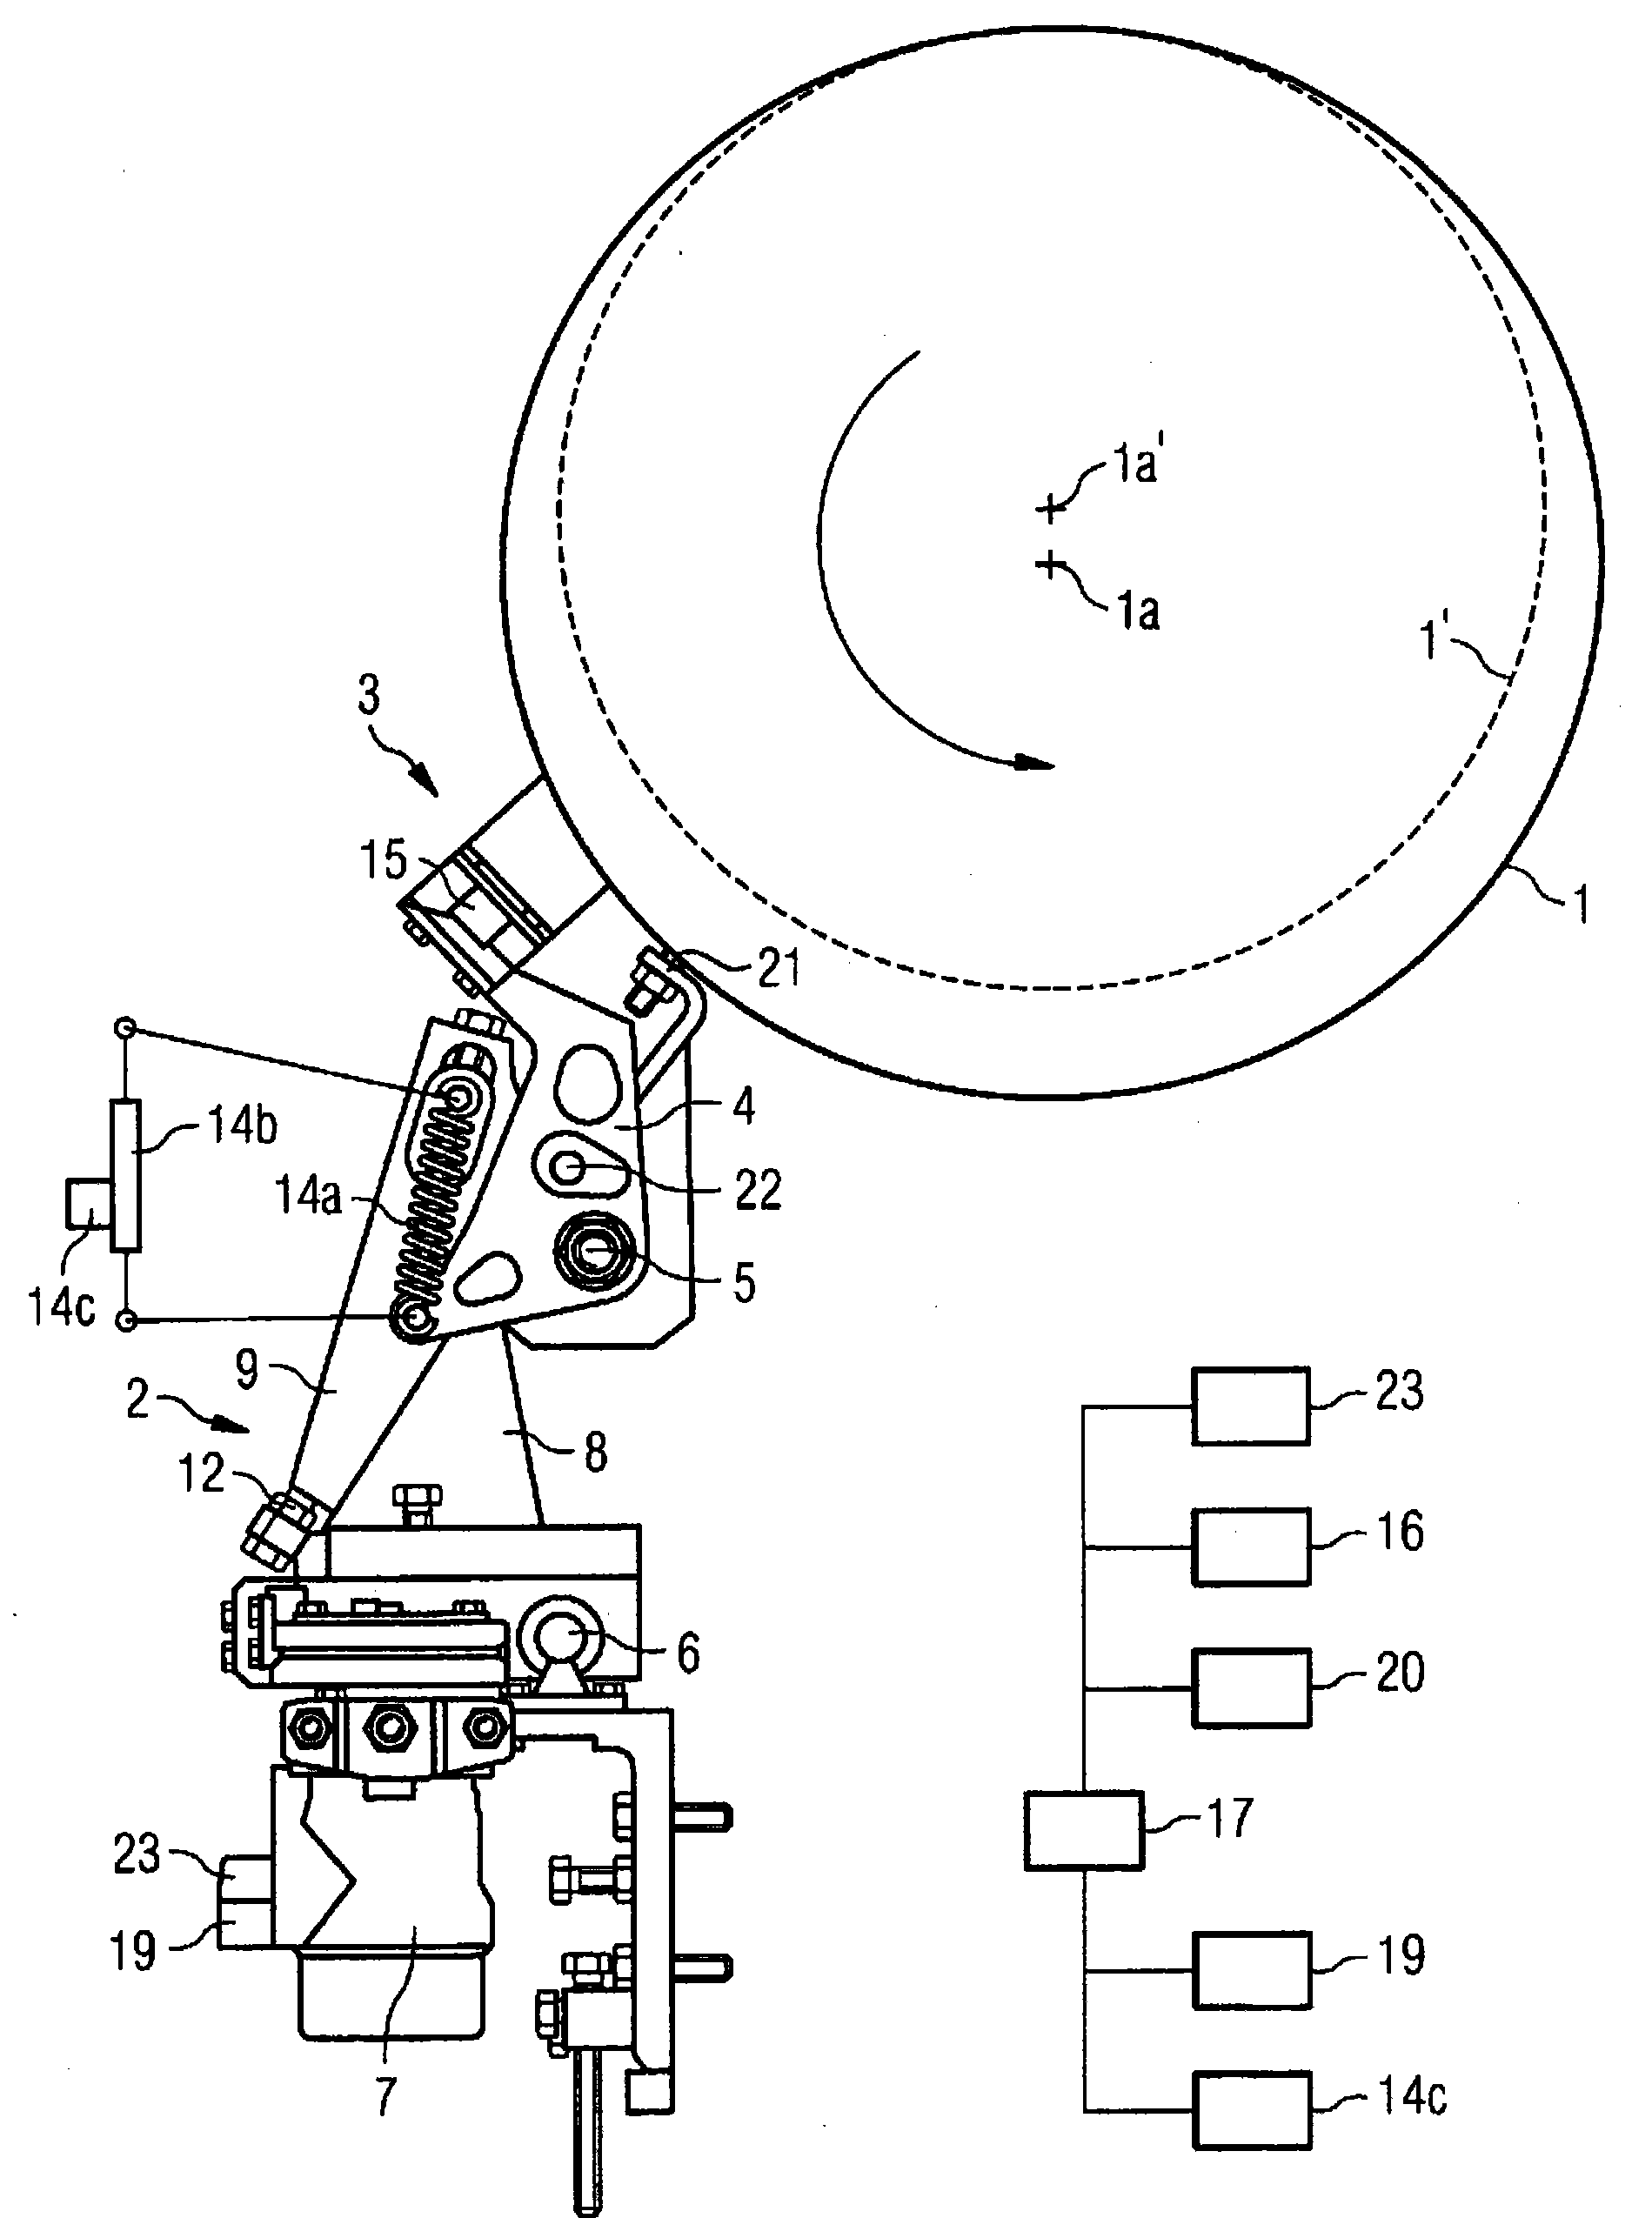 Method and device for cleaning the outer surface of roll or roller